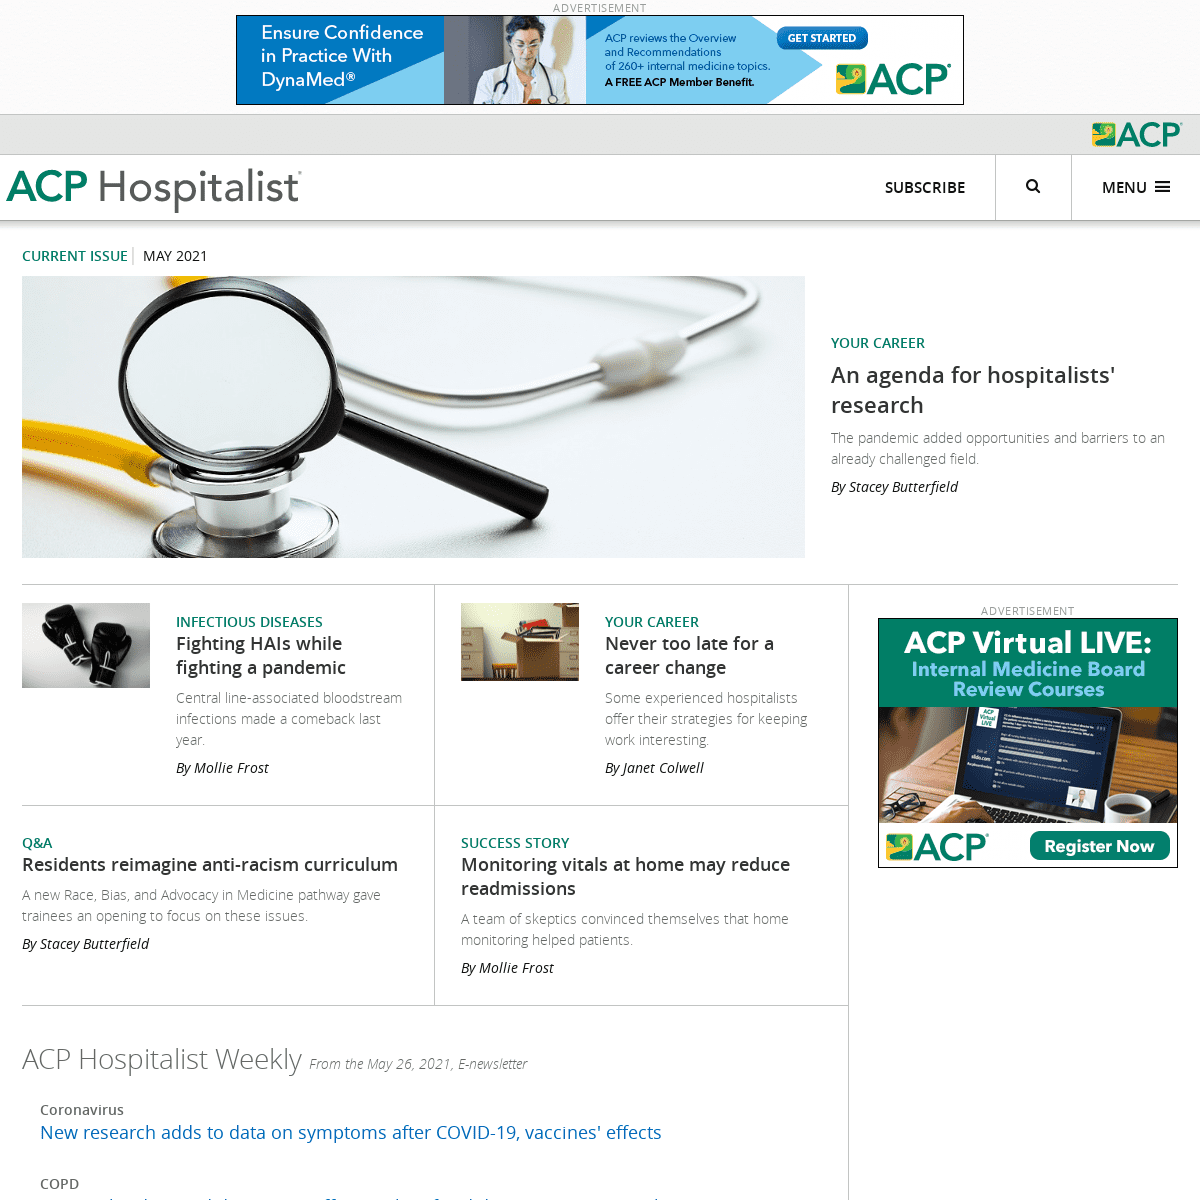 A complete backup of https://acphospitalist.org